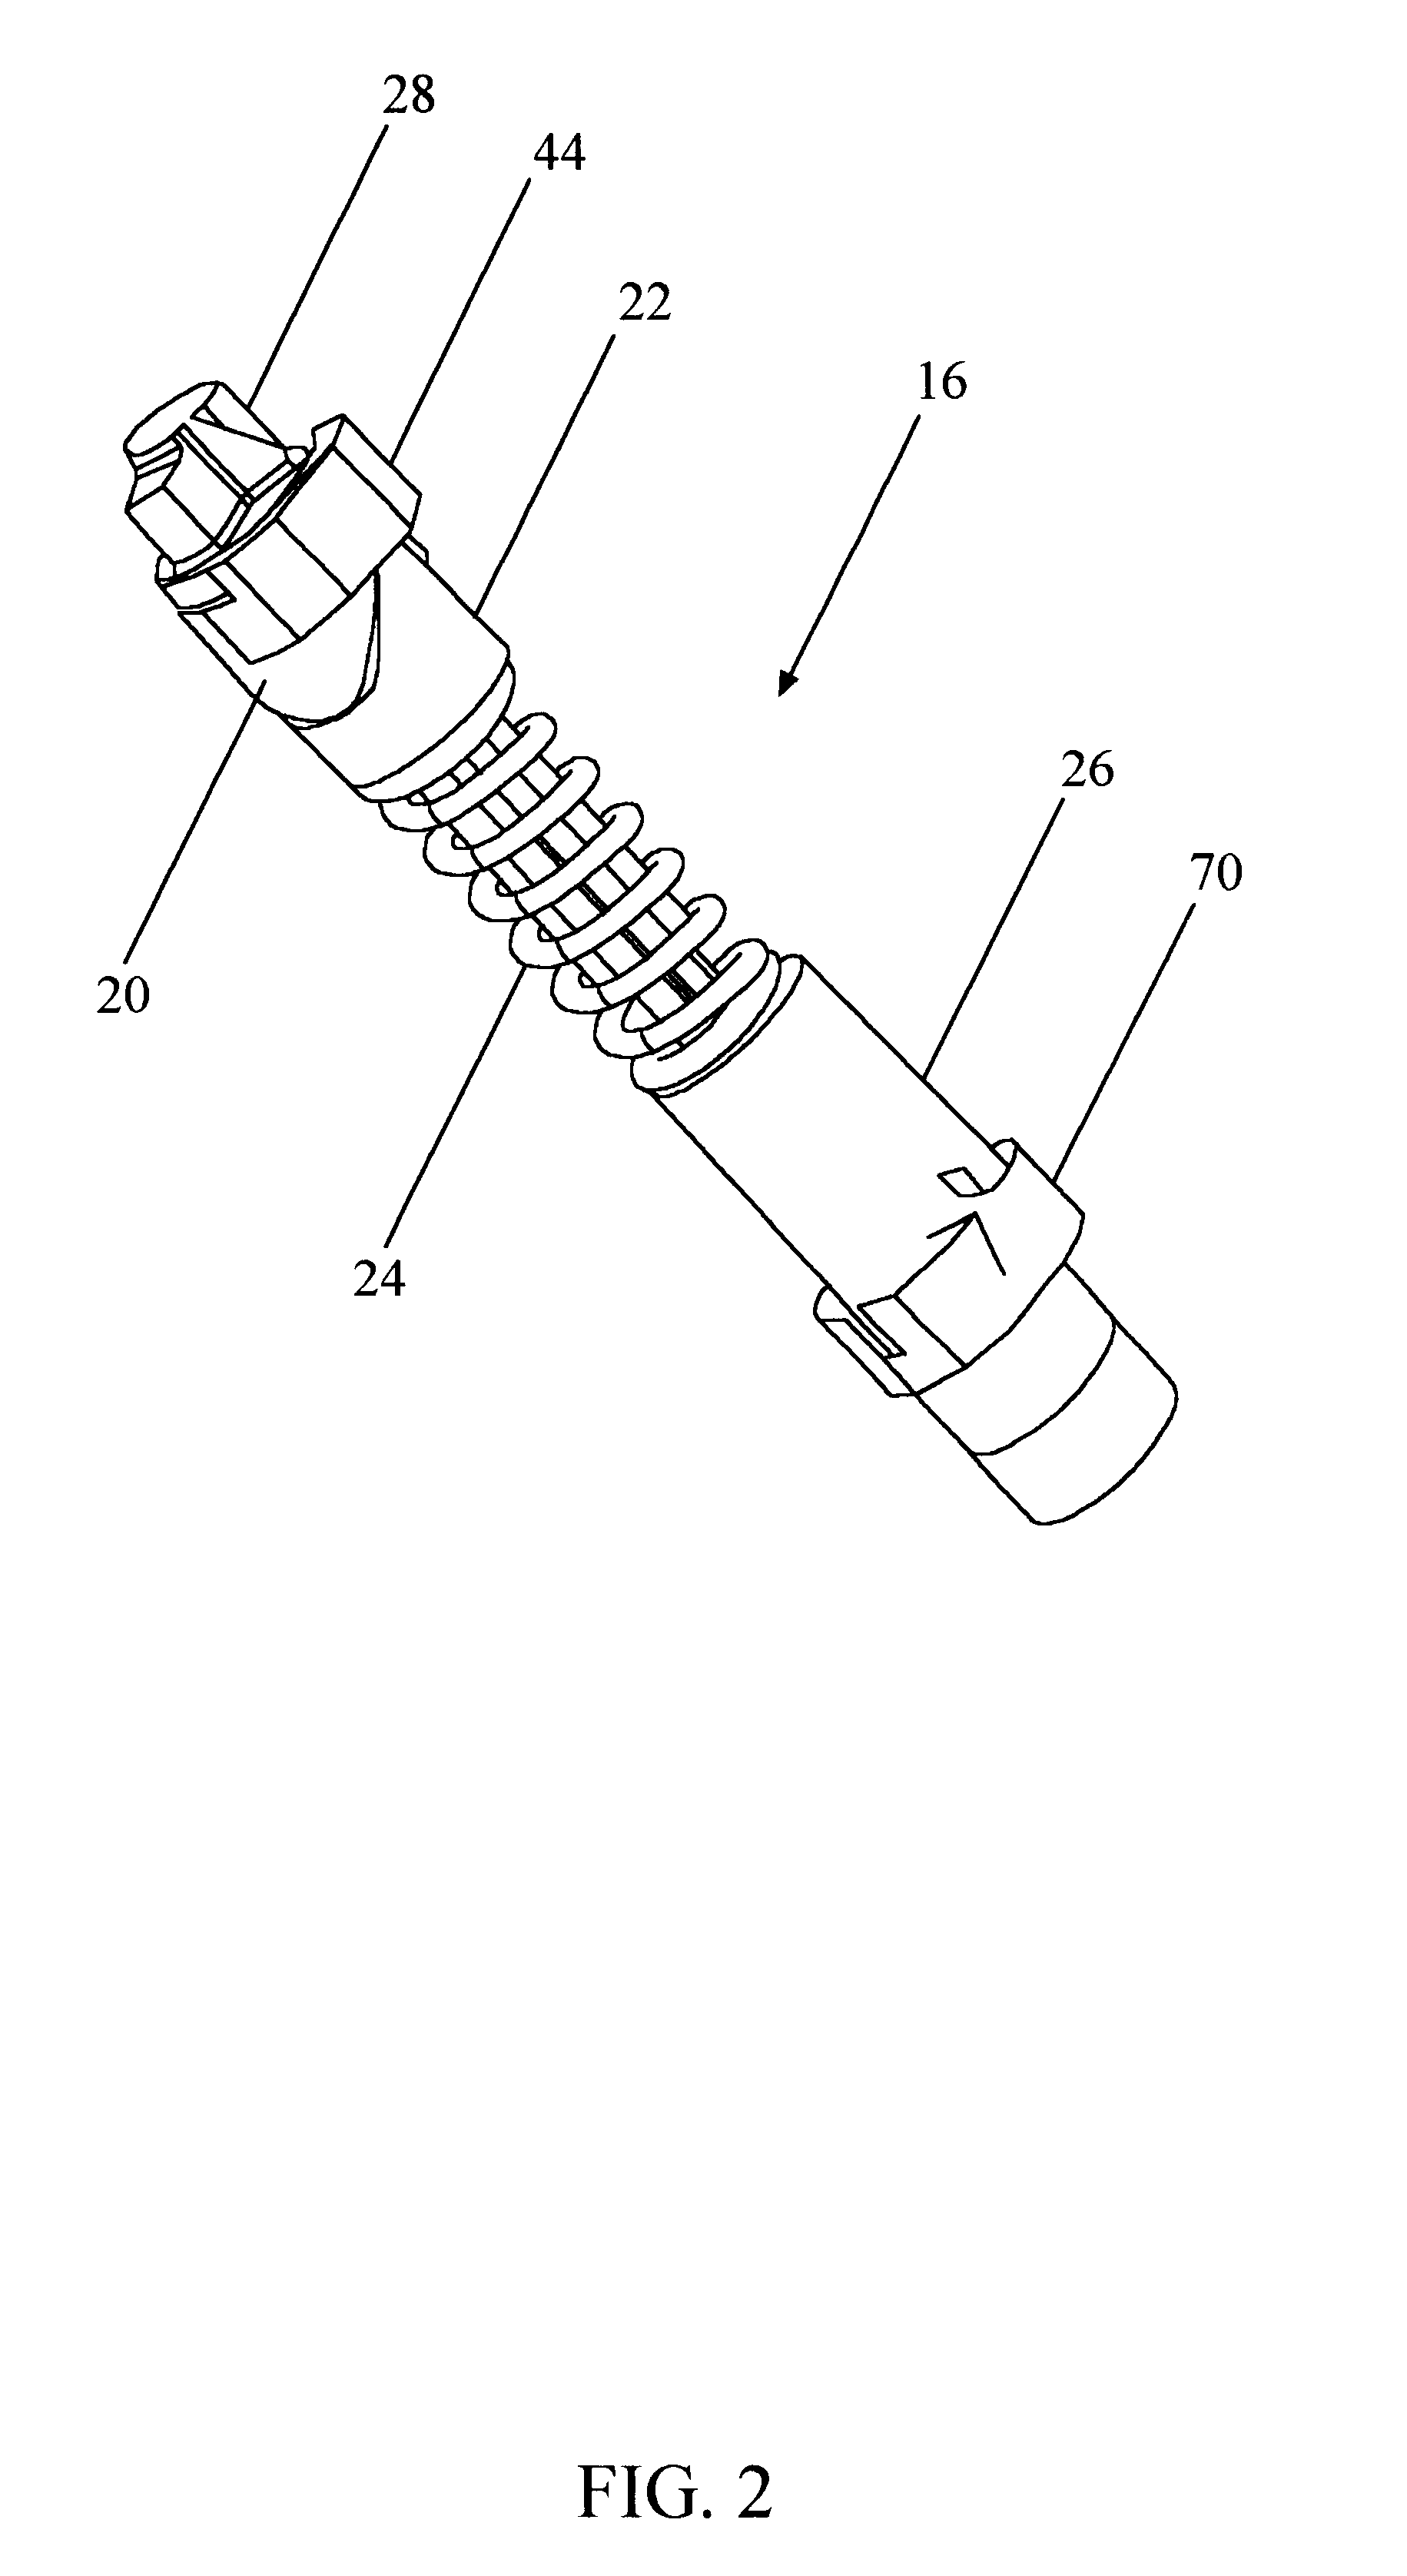 Preferential deflection hinge mechanism with an idler for foldable portable electronic devices